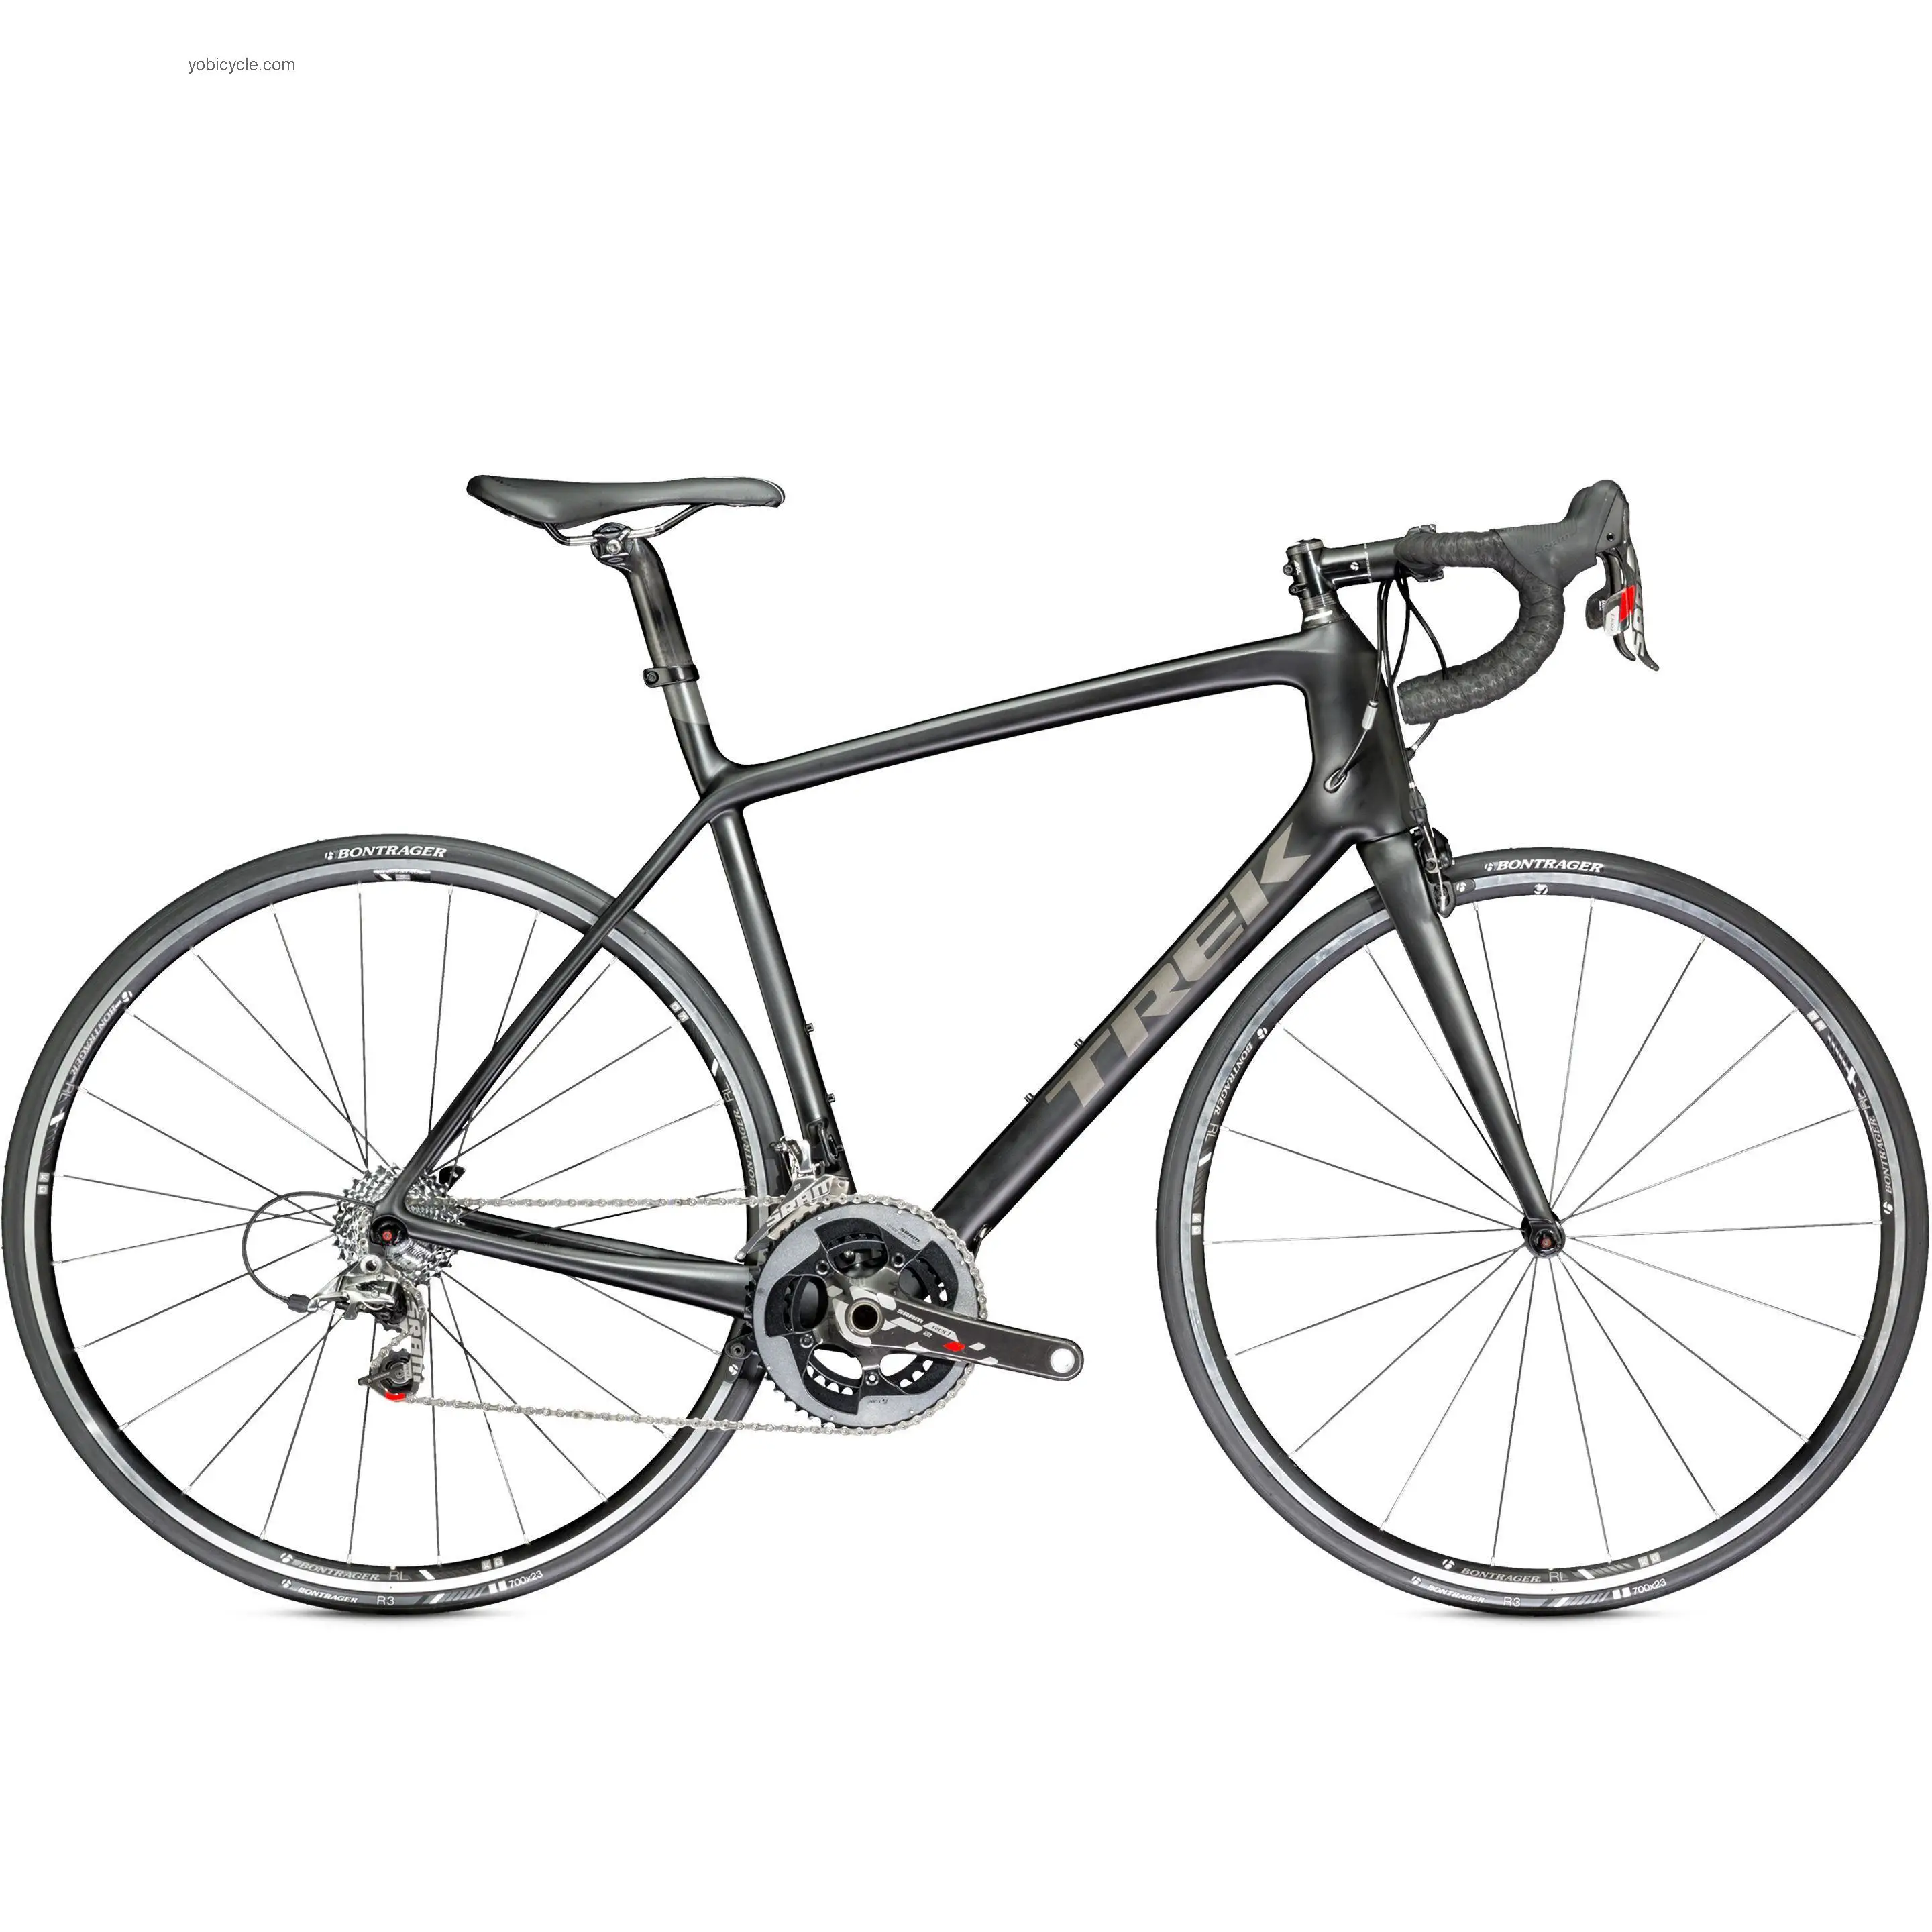 Trek Madone 5.9 C H2 RED 2014 comparison online with competitors